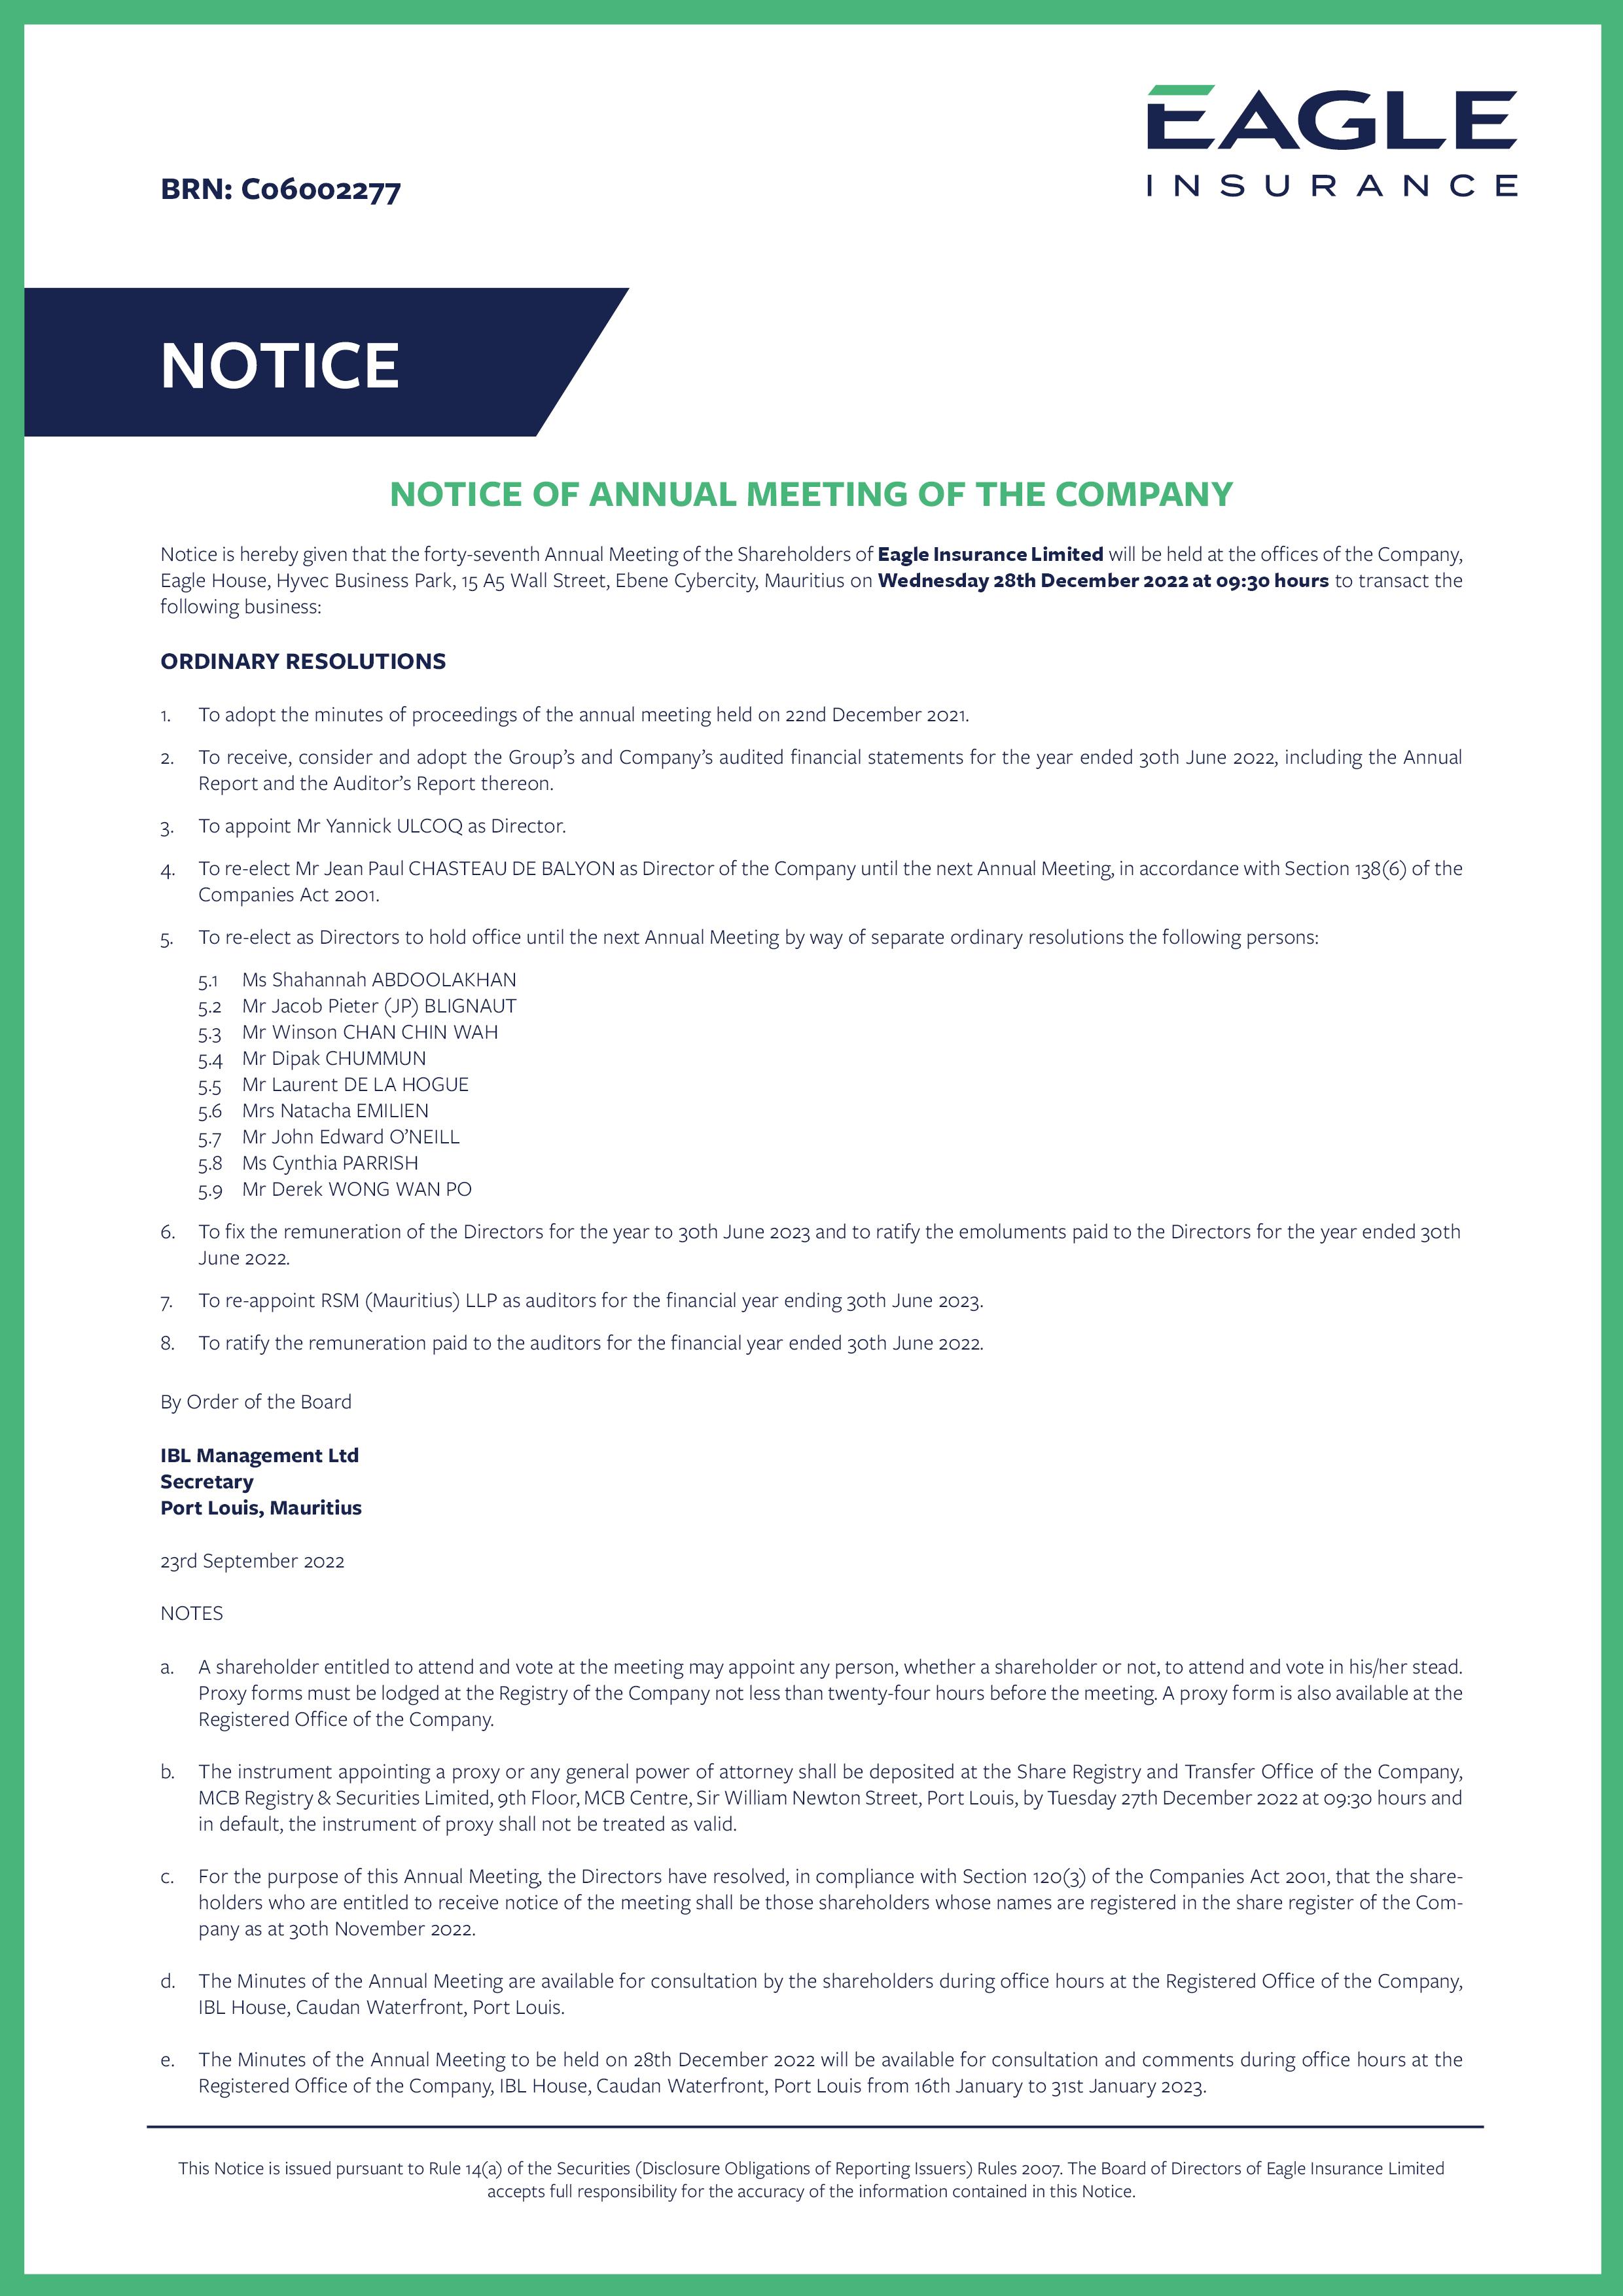 NOTICE OF ANNUAL MEETING OF THE COMPANY